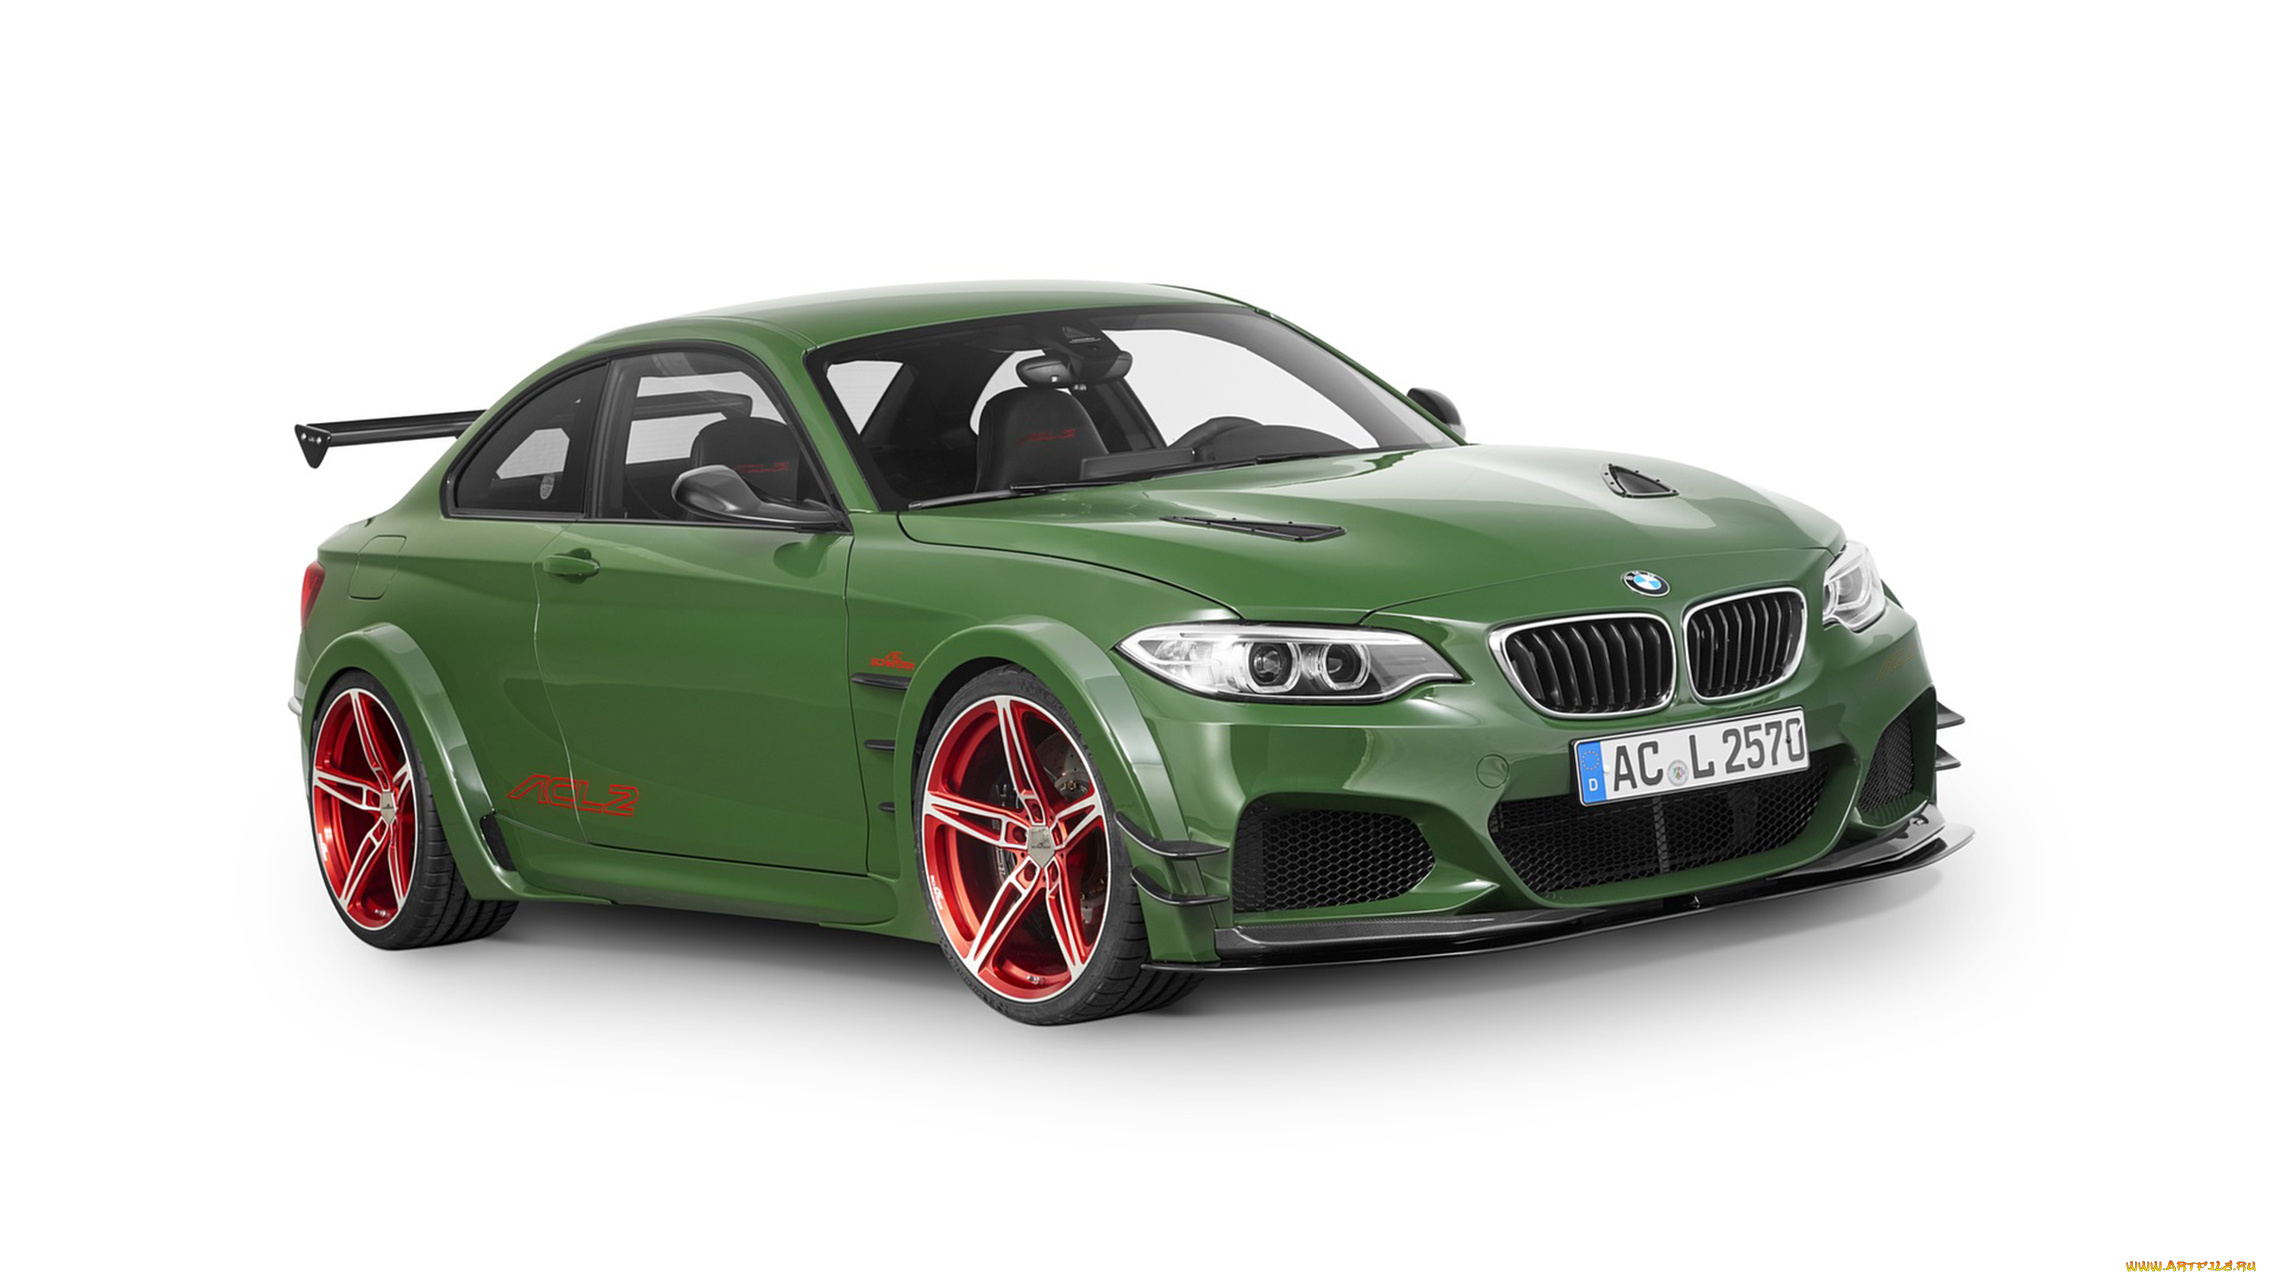 ac, schnitzer, acl2, concept, based, on, the, bmw, m-235i, coupe, 2016, автомобили, bmw, 2016, m-235i, coupe, acl2, ac, schnitzer, based, concept